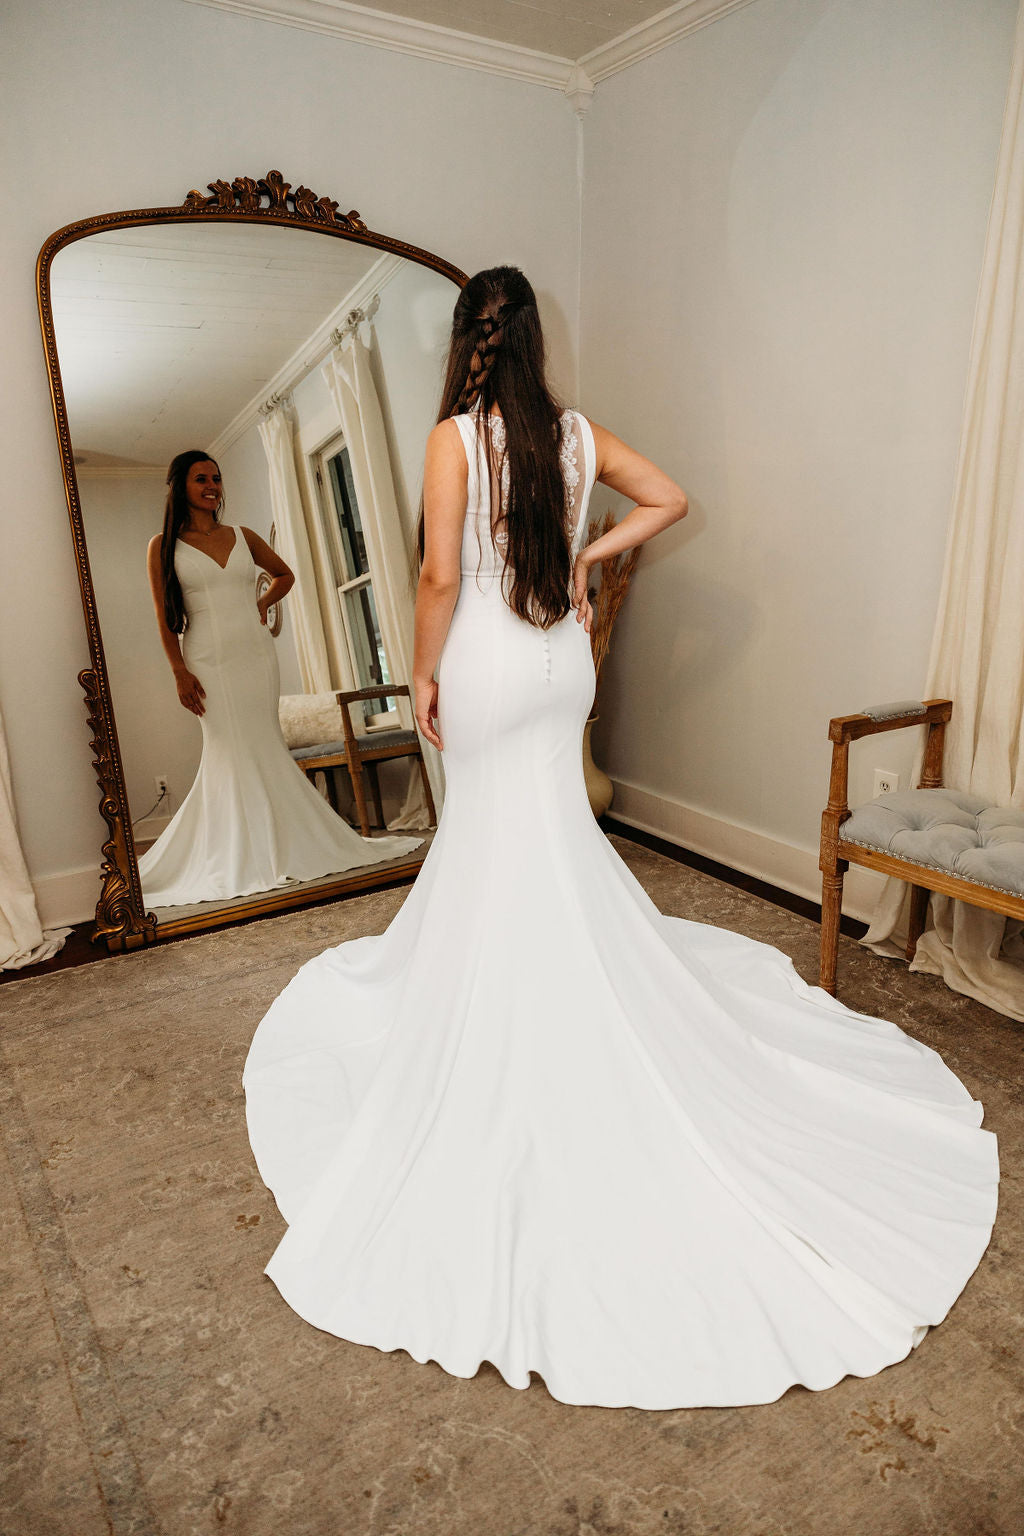 The Lainey Gown